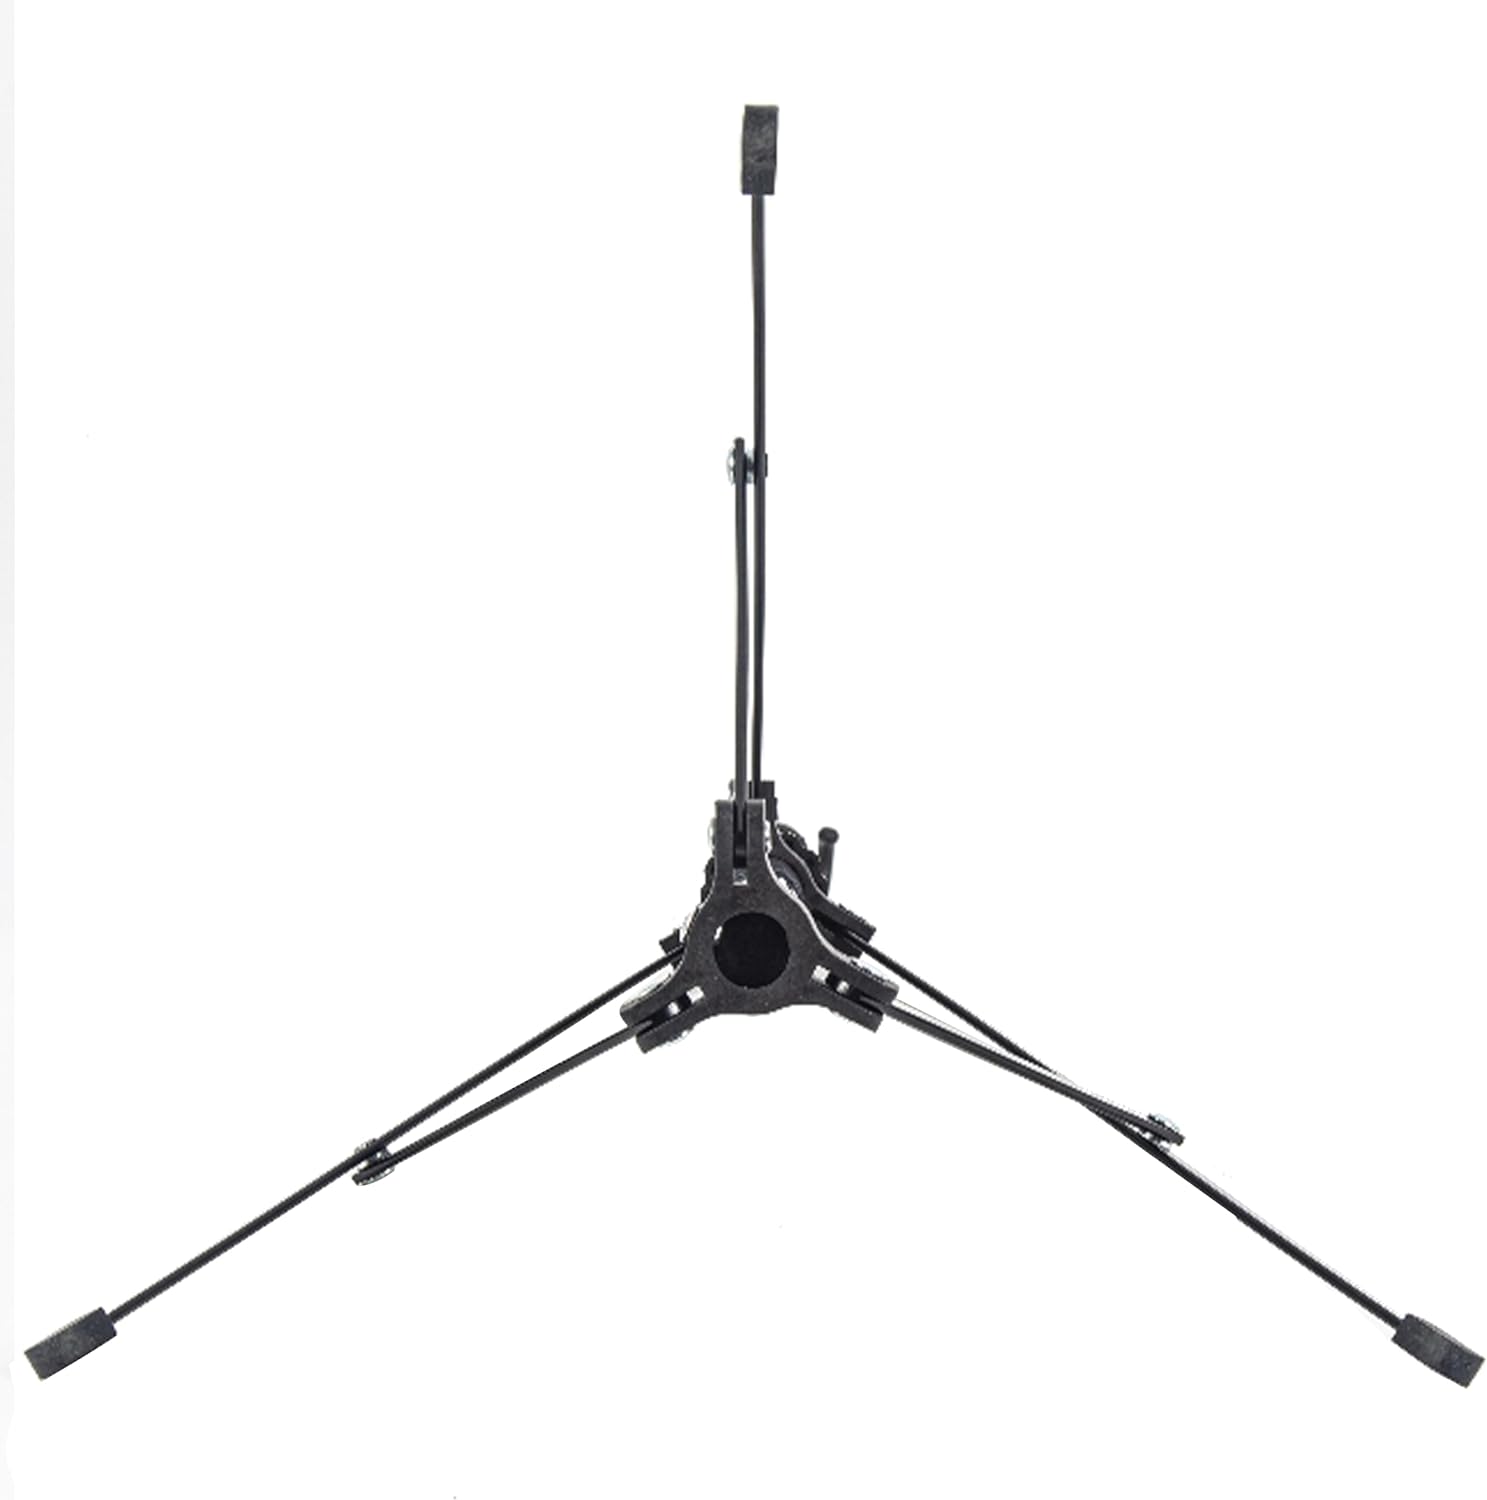 Versatile Tripod IV Poles Stand with Hooks | Collapsible Design | Floor Stand | Organizer Lanyard Rack | Portable Travel IV Poles for Tables, Keychains & More